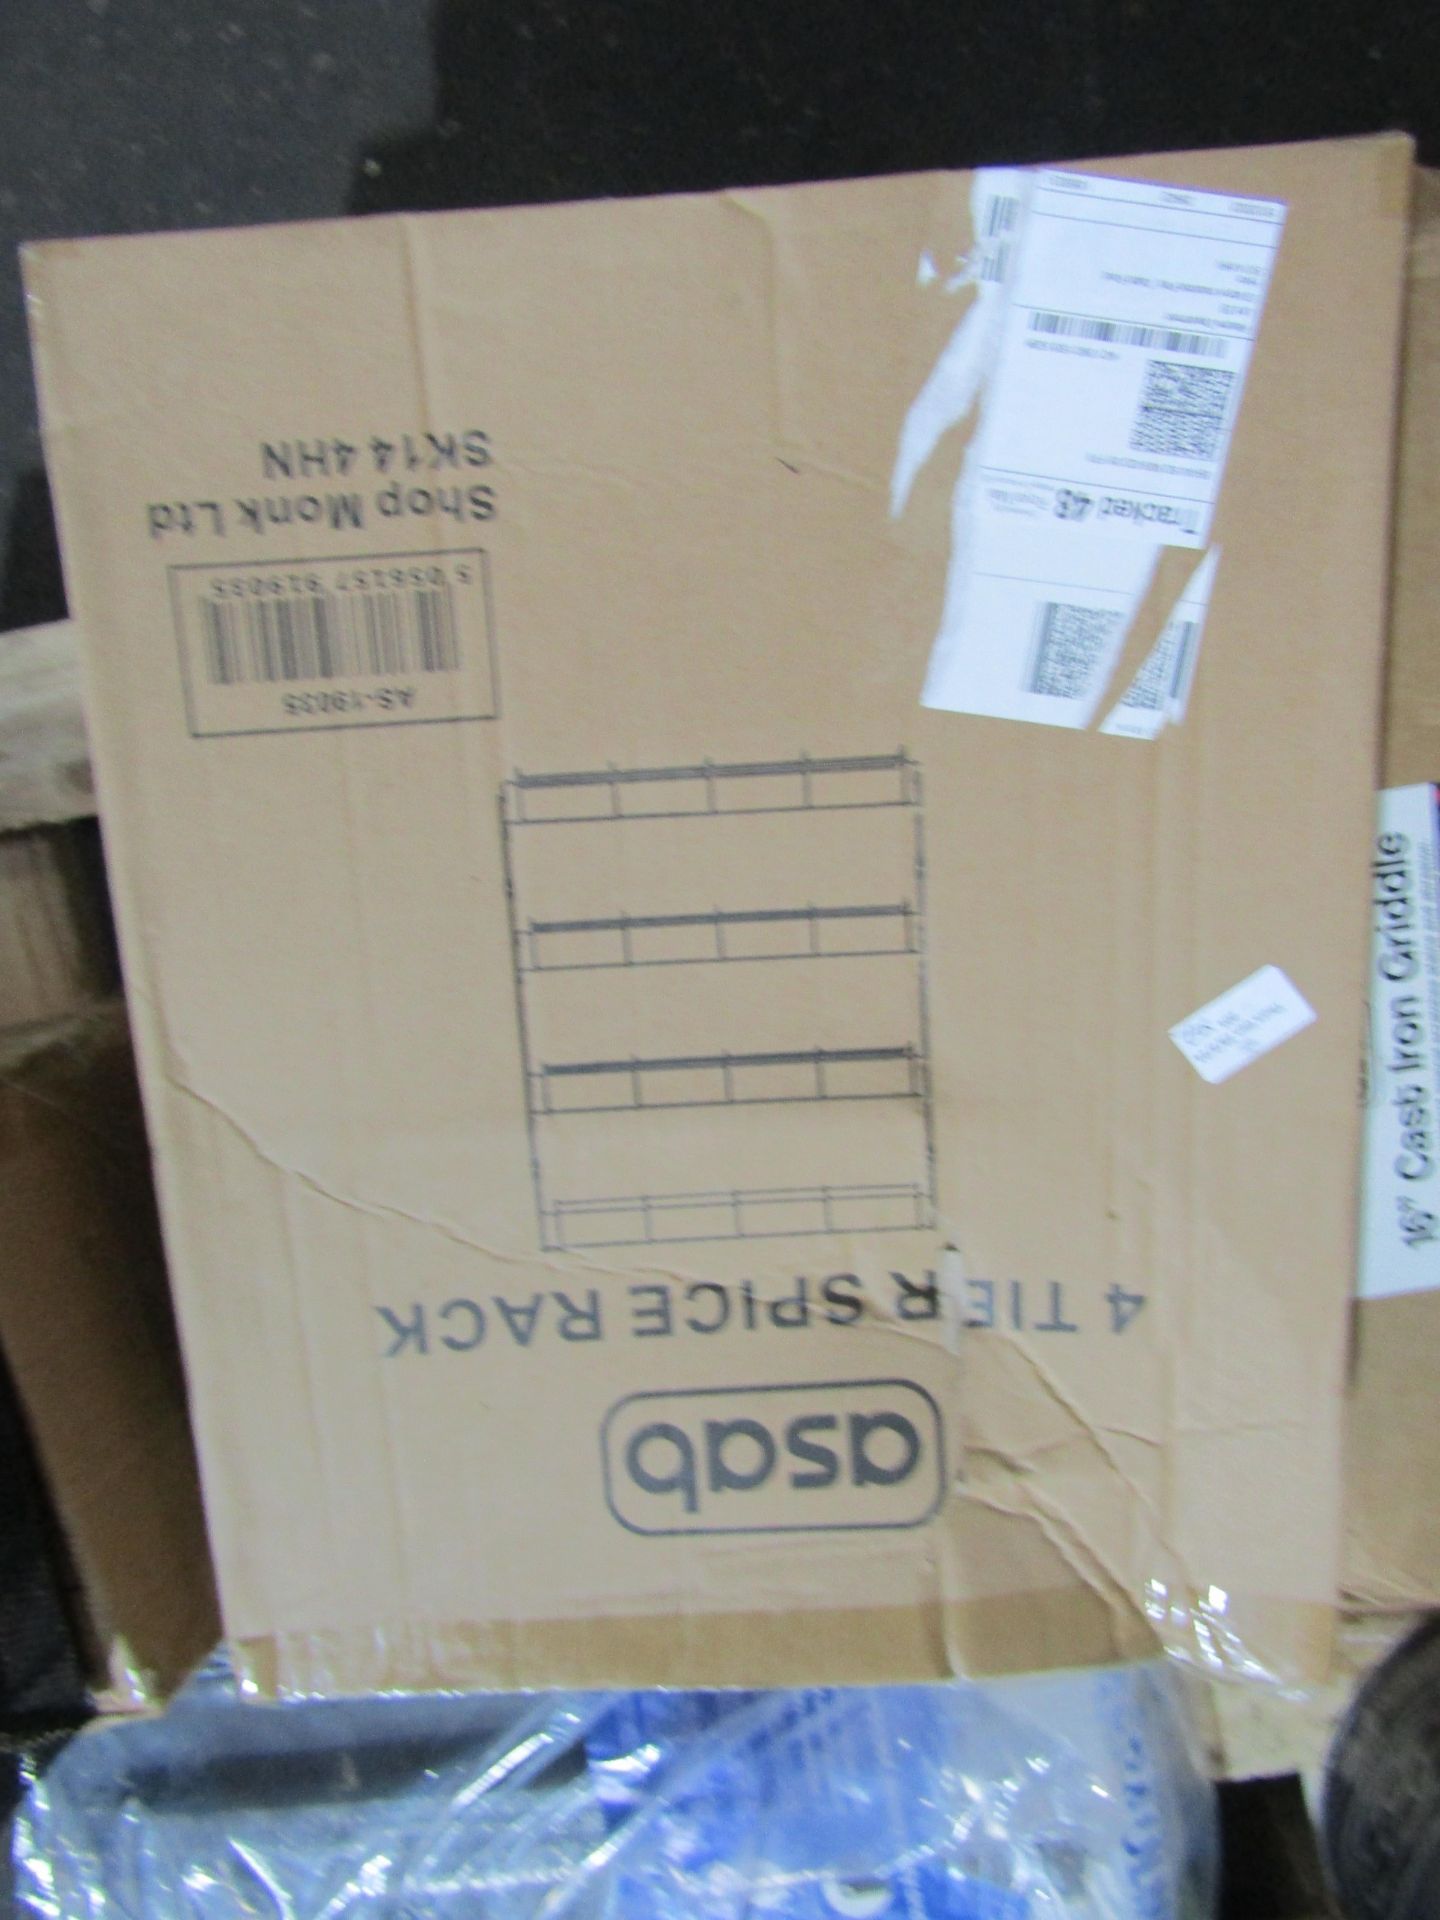 2 Asab 4 Tier Spice Racks. Boxed but unchecked